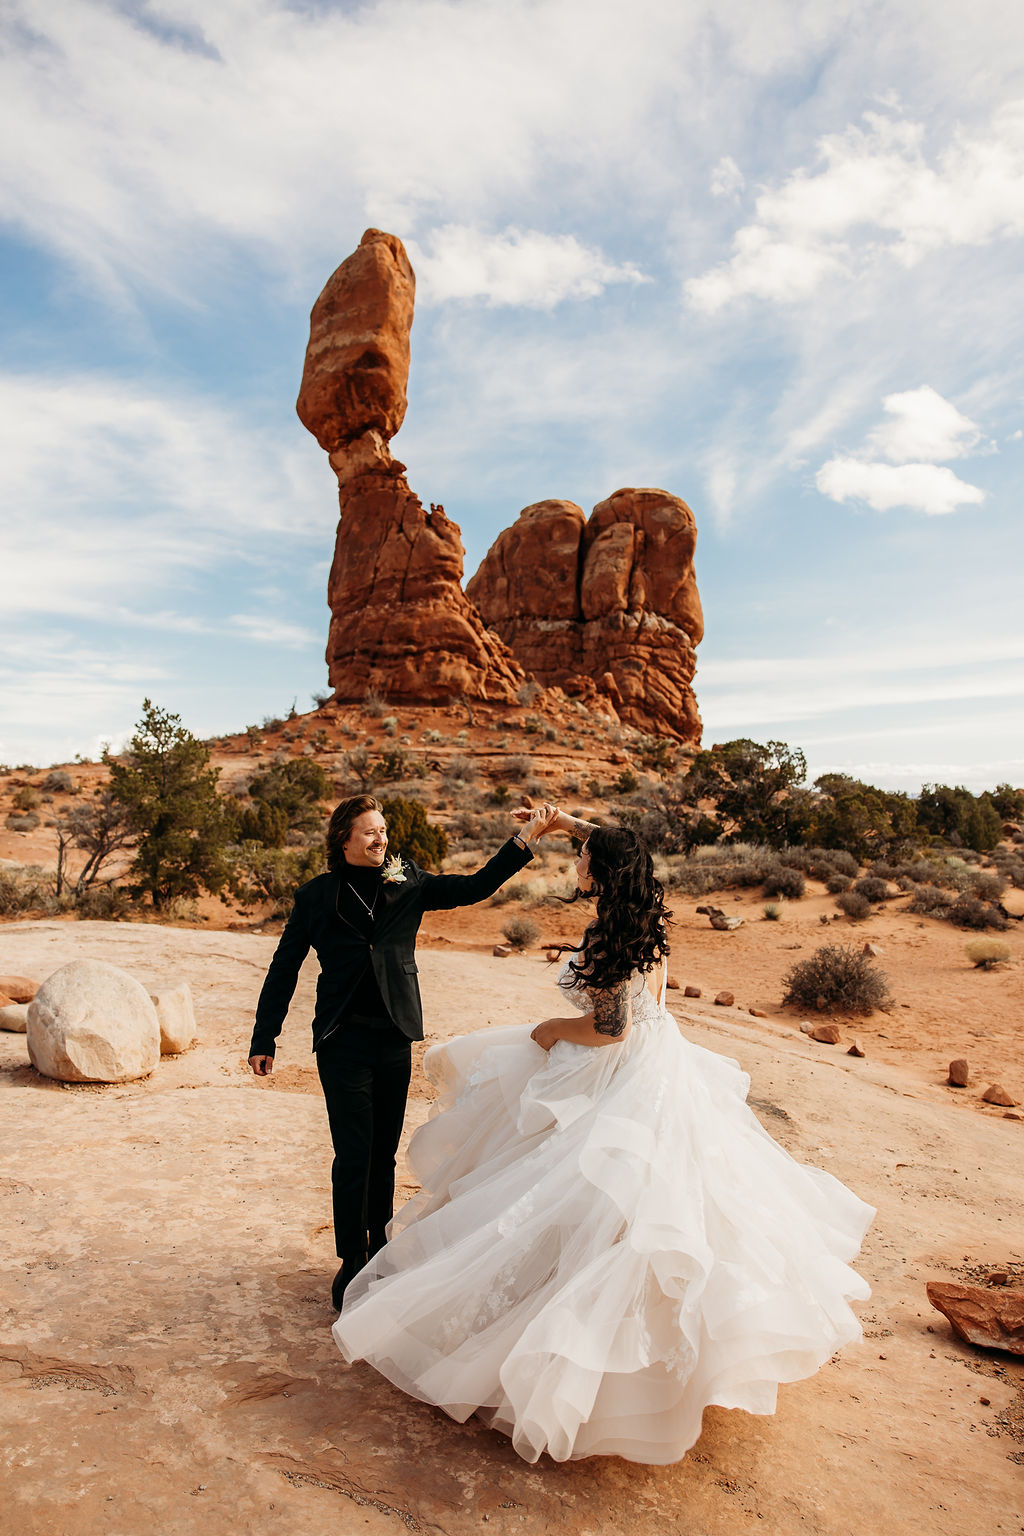 A couple dressed in wedding attire dance in front of a large, unique rock formation in a desert landscape under a partly cloudy sky at their destination elopement